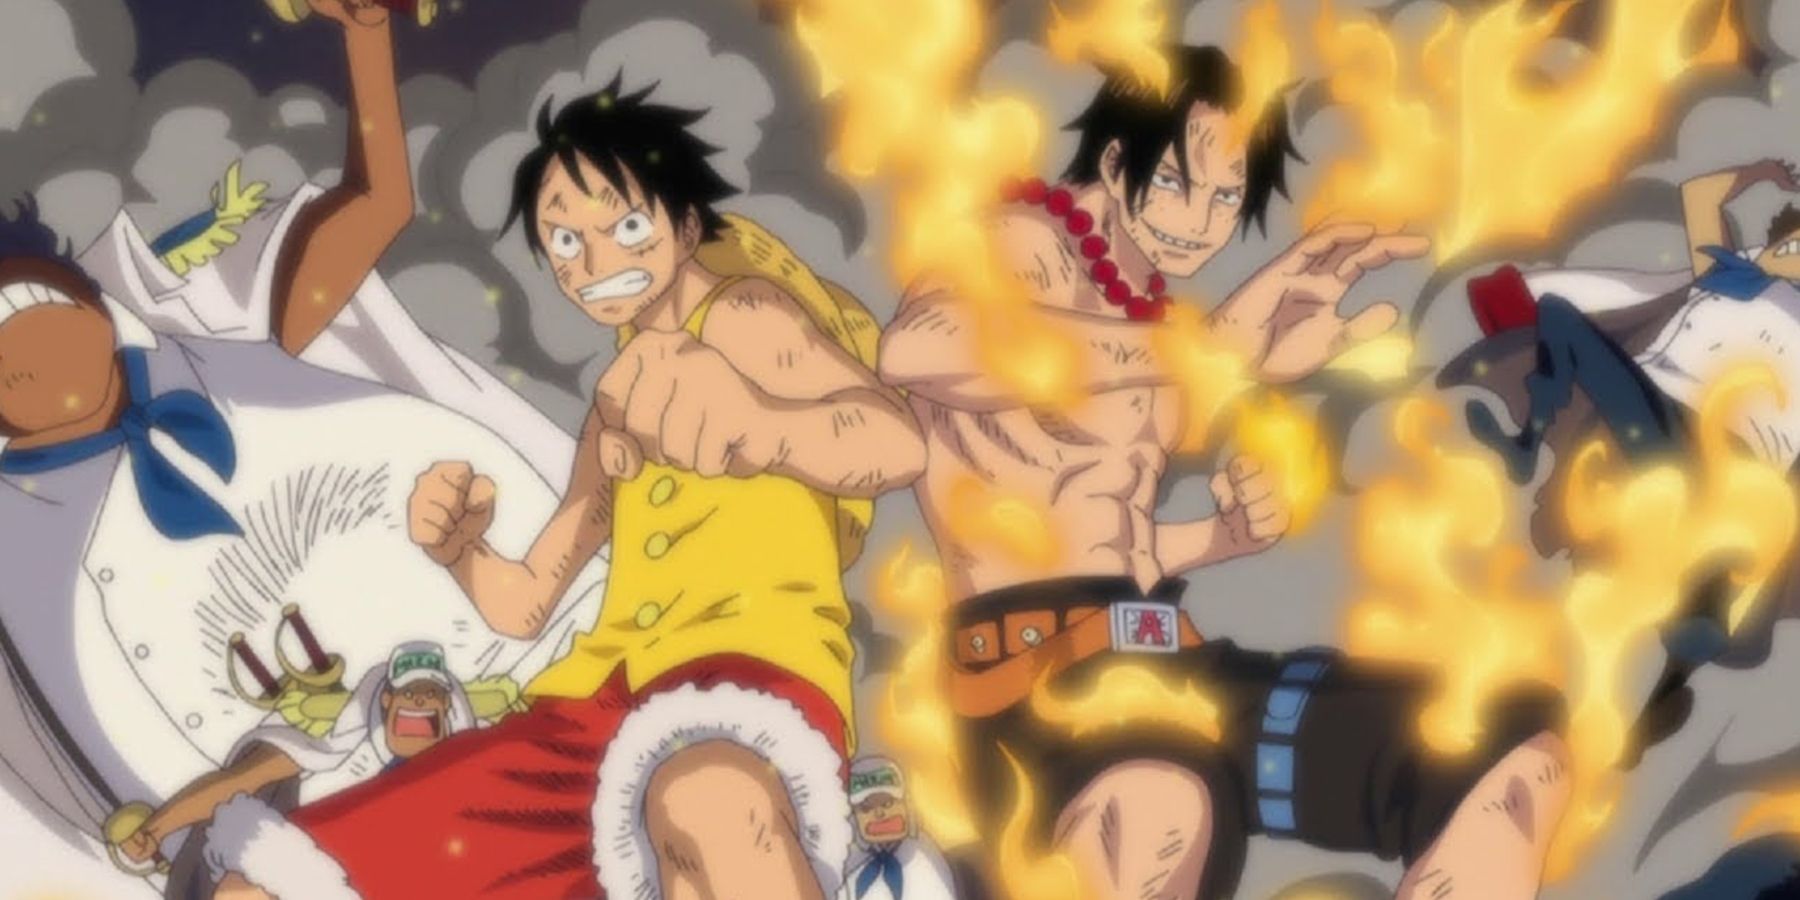 ace and luffy in one piece